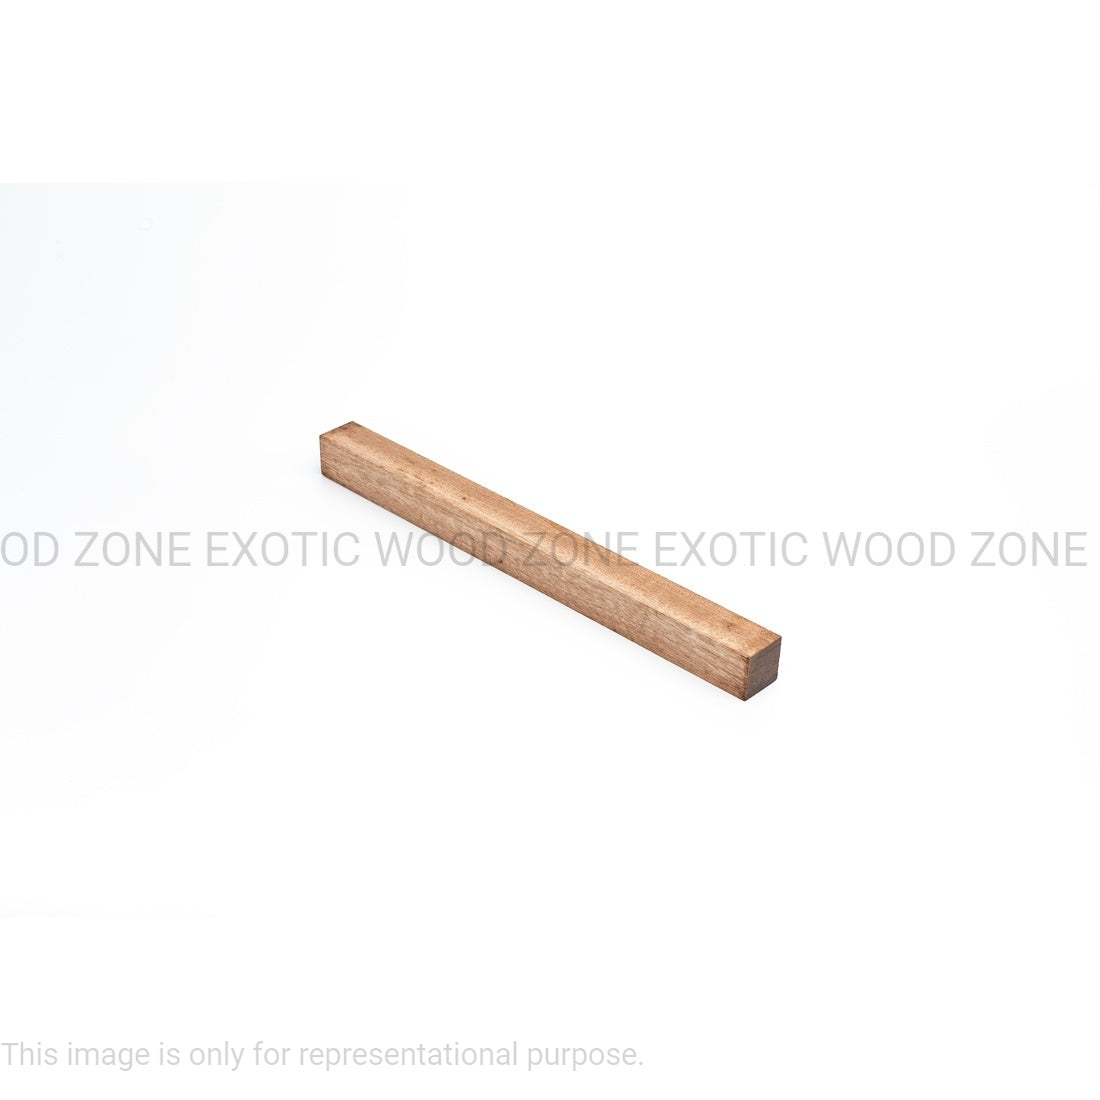 Sapele Hobbywood Blank 1&quot; x 1 &quot; x 12&quot; inches Exotic Wood Zone